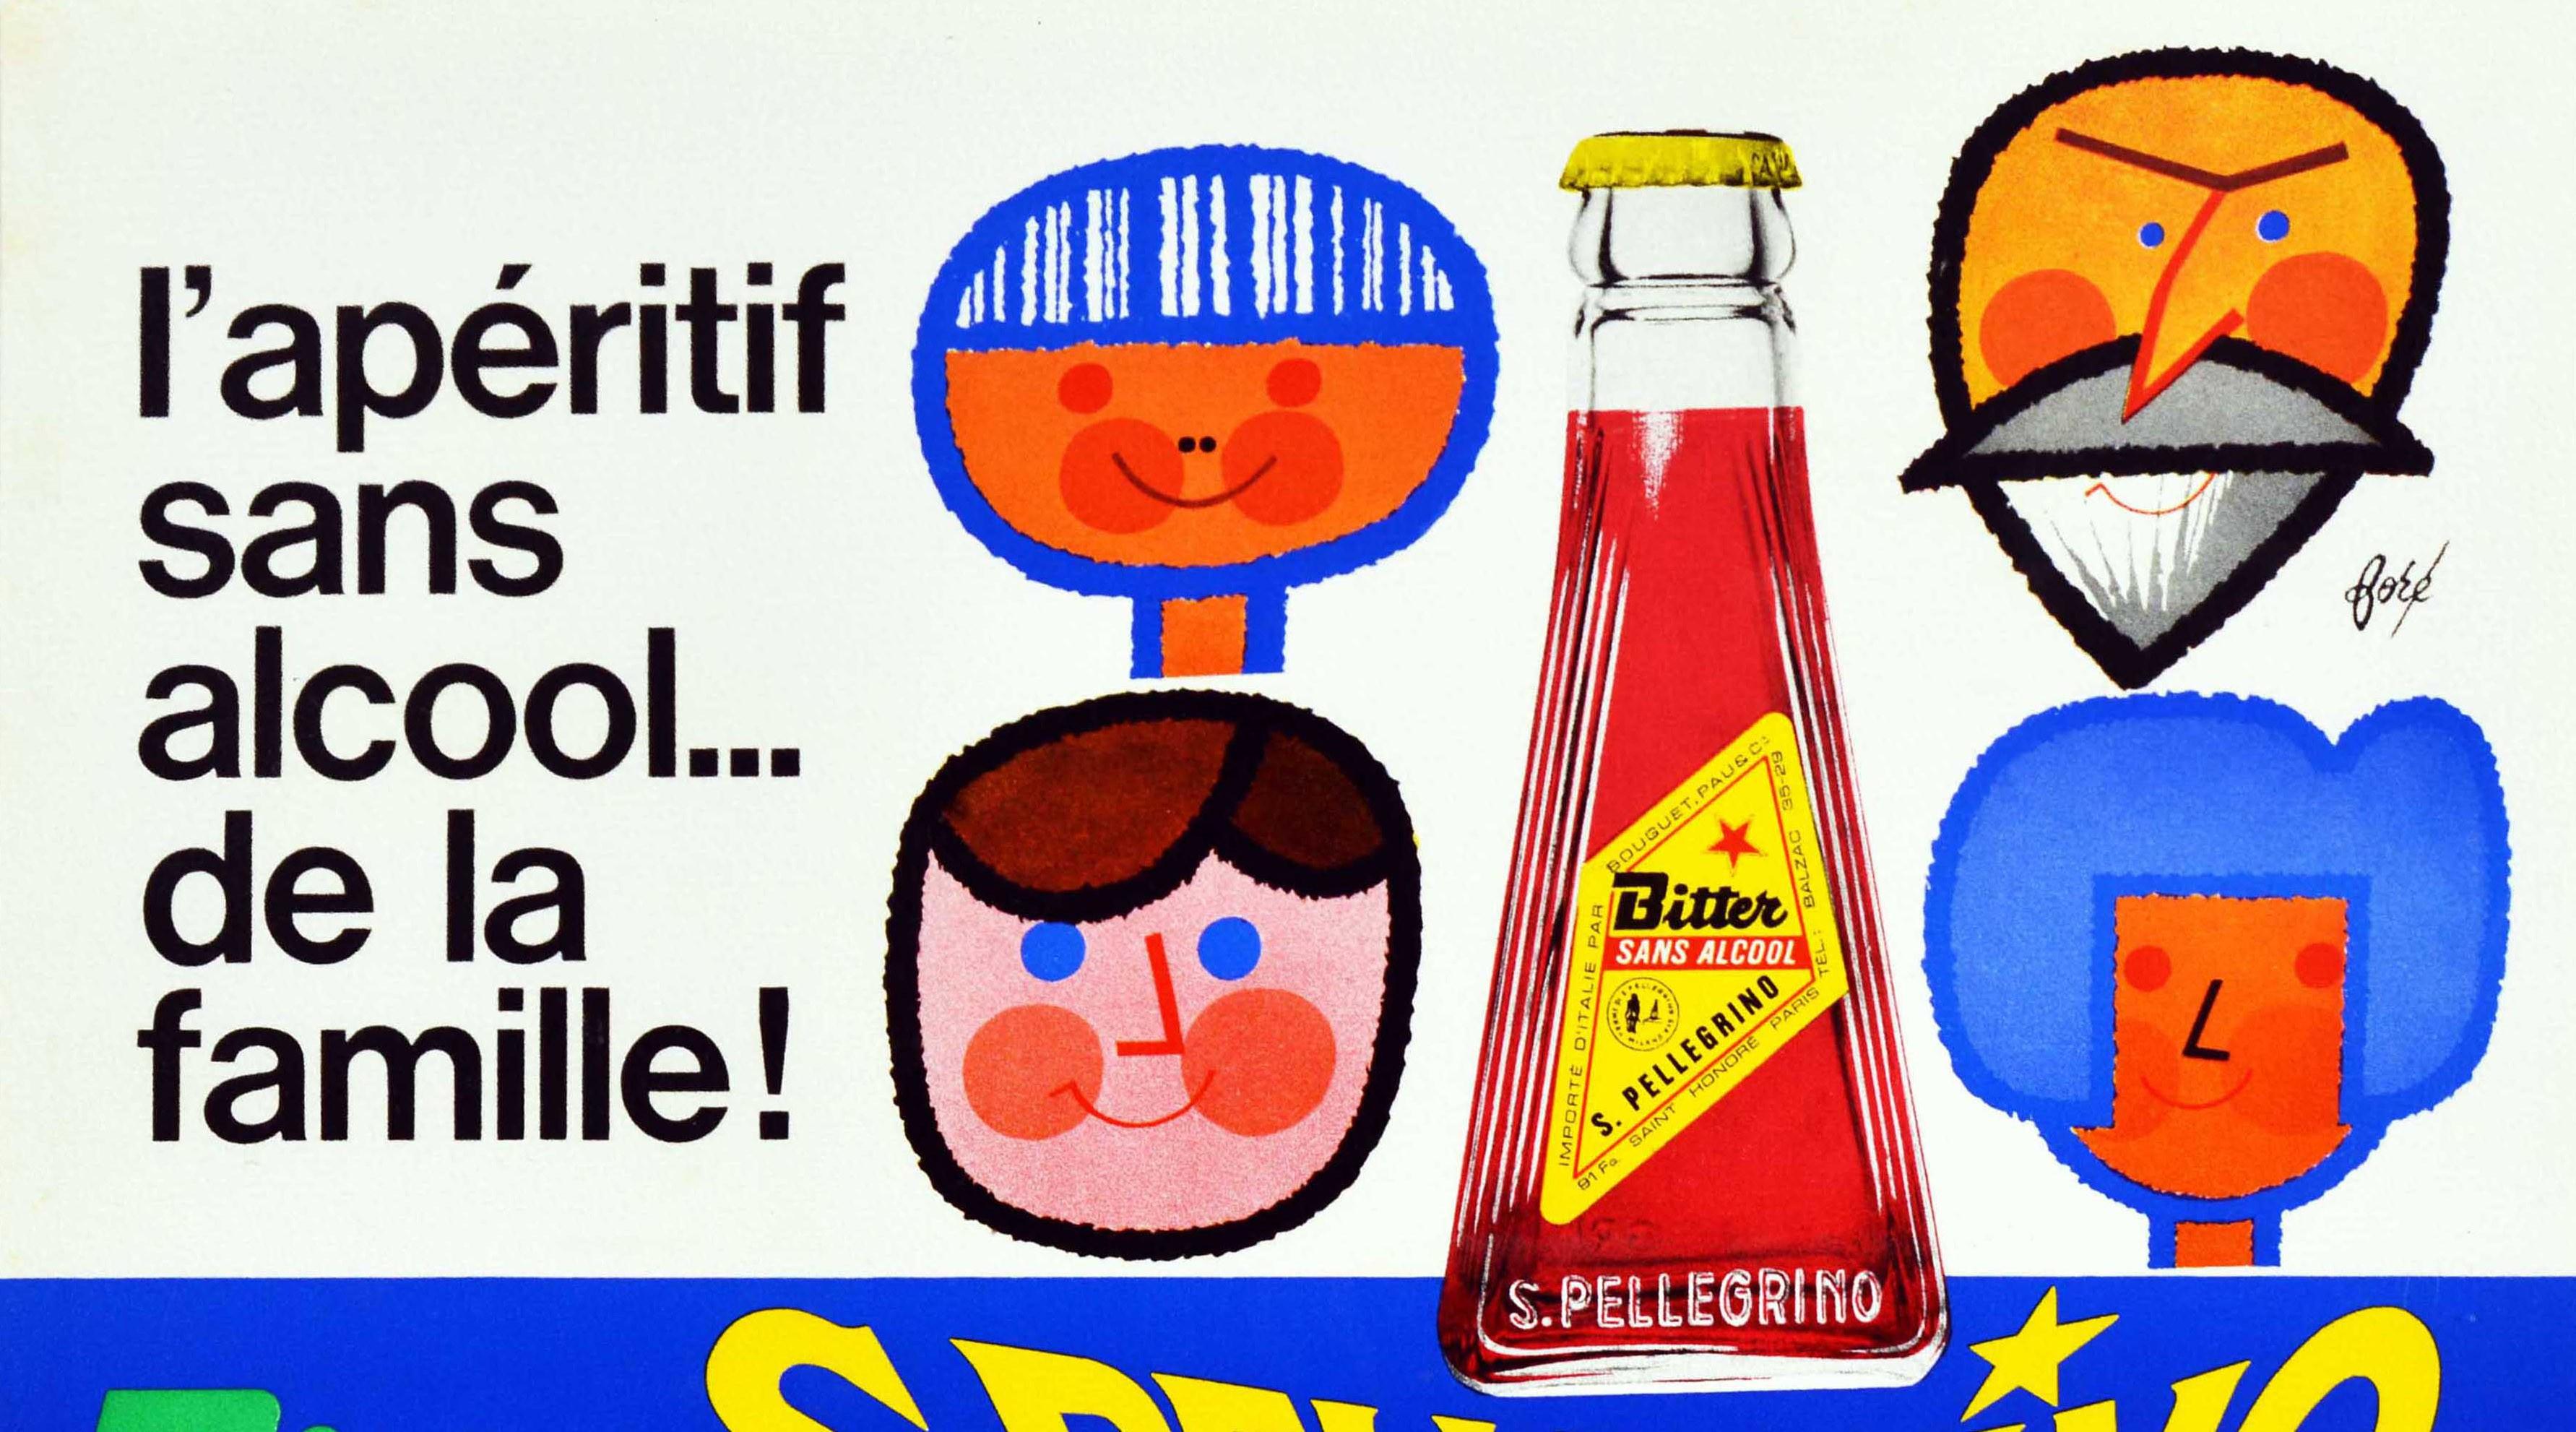 Original vintage advertising poster for S.Pellegrino non-alcoholic Bitter aperitif ... for the family / l'aperitif sans alcool ... de la famille! - featuring an image of the Bitter drink bottle and caricature faces of the family to the sides.